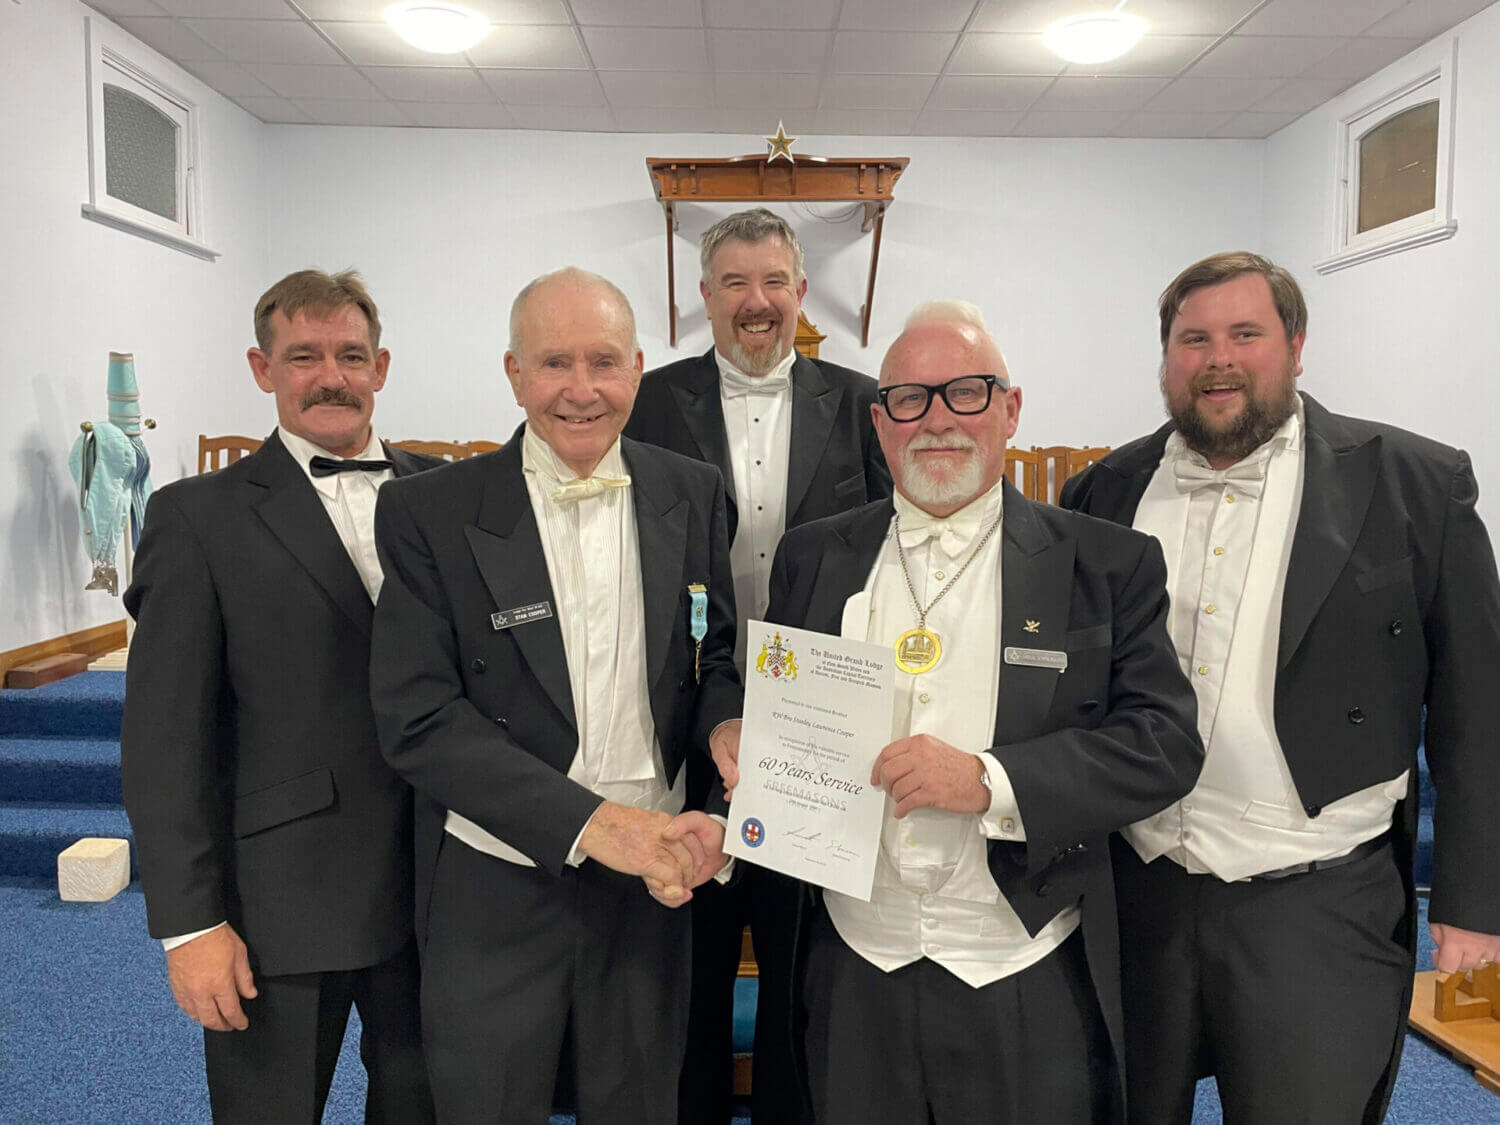 Worshipful Master Brett Farrar, Right Worshipful Stan Cooper, Very Worshipful Russell Cochrane, DGIW, Right Worshipful Gregg Summerhayse, and Right Worshipful Sean Hogan RGC. Right Worshipful Stan Cooper was given his 60-year Service Certificate at Lodge Condobolin Installation on Saturday, 13 May. Image Credit: Anne Coffey.